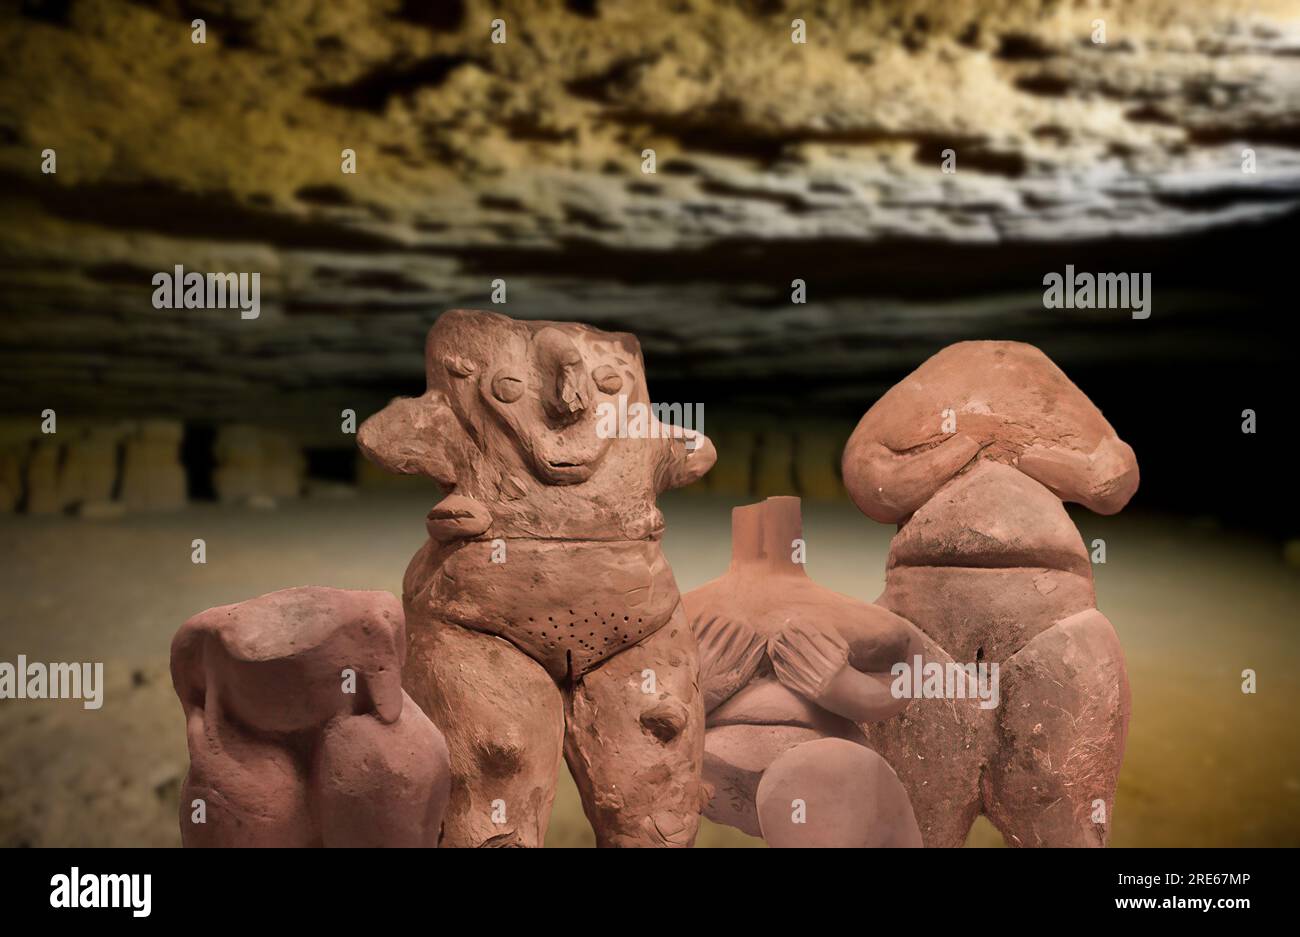 Neolithic Art - Some statuettes dating back to the Neolithic era Stock Photo